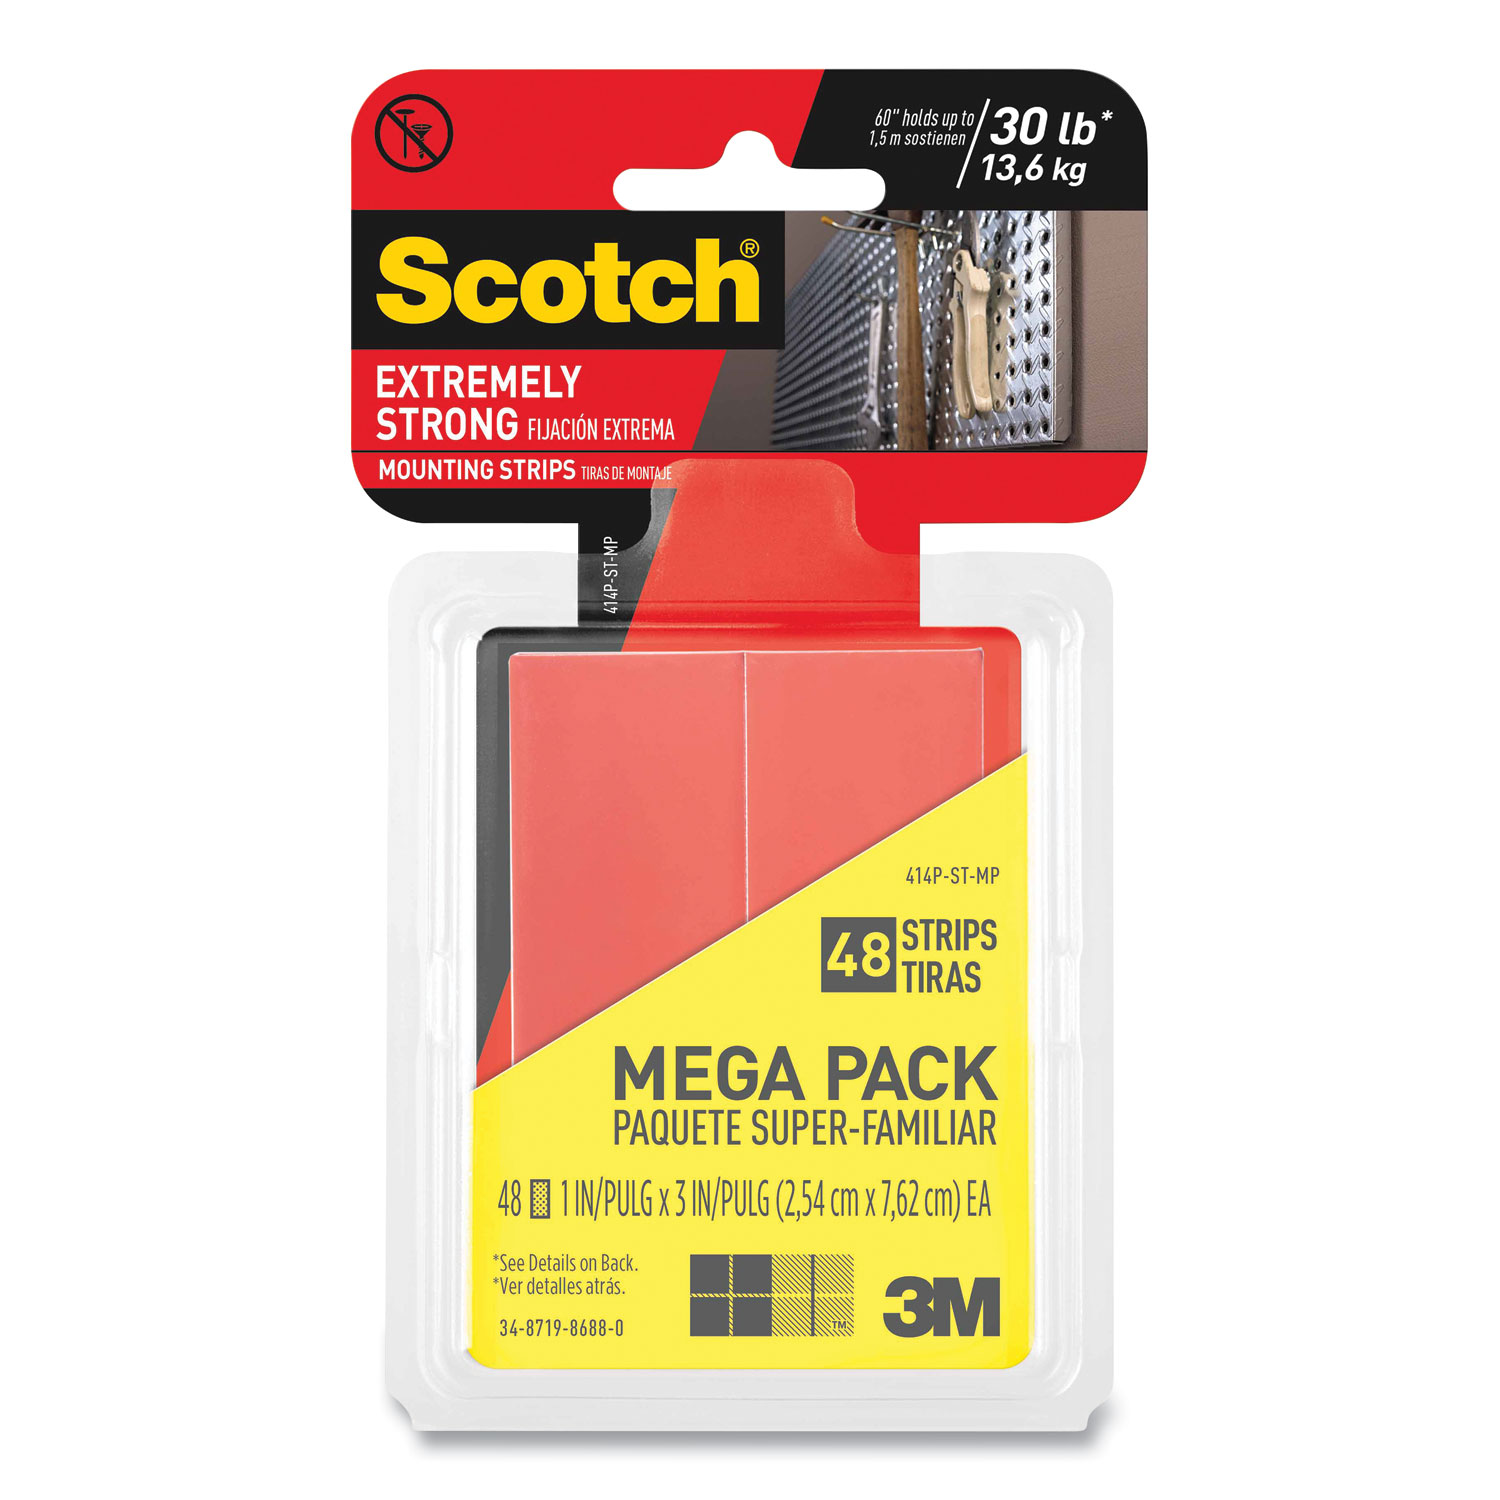  Scotch 414PSTMP Extremely Strong Mounting Strips, Permanent, Holds up to 20 lbs, 1 x 3, Black, 48/Pack (MMM24403720) 